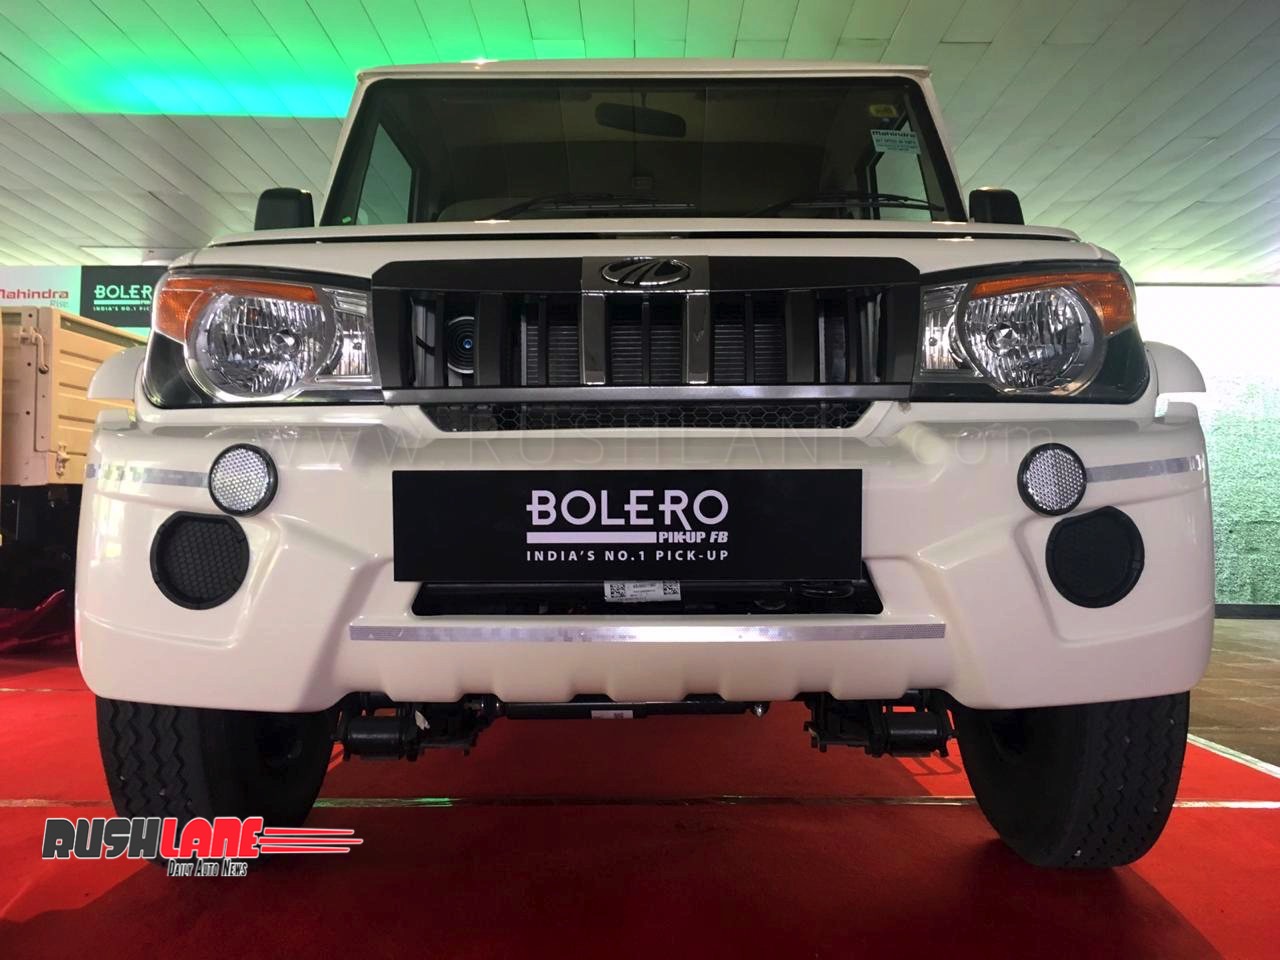 2018 Mahindra Bolero Pik Up launched in India - Offers Rs 4 lakh